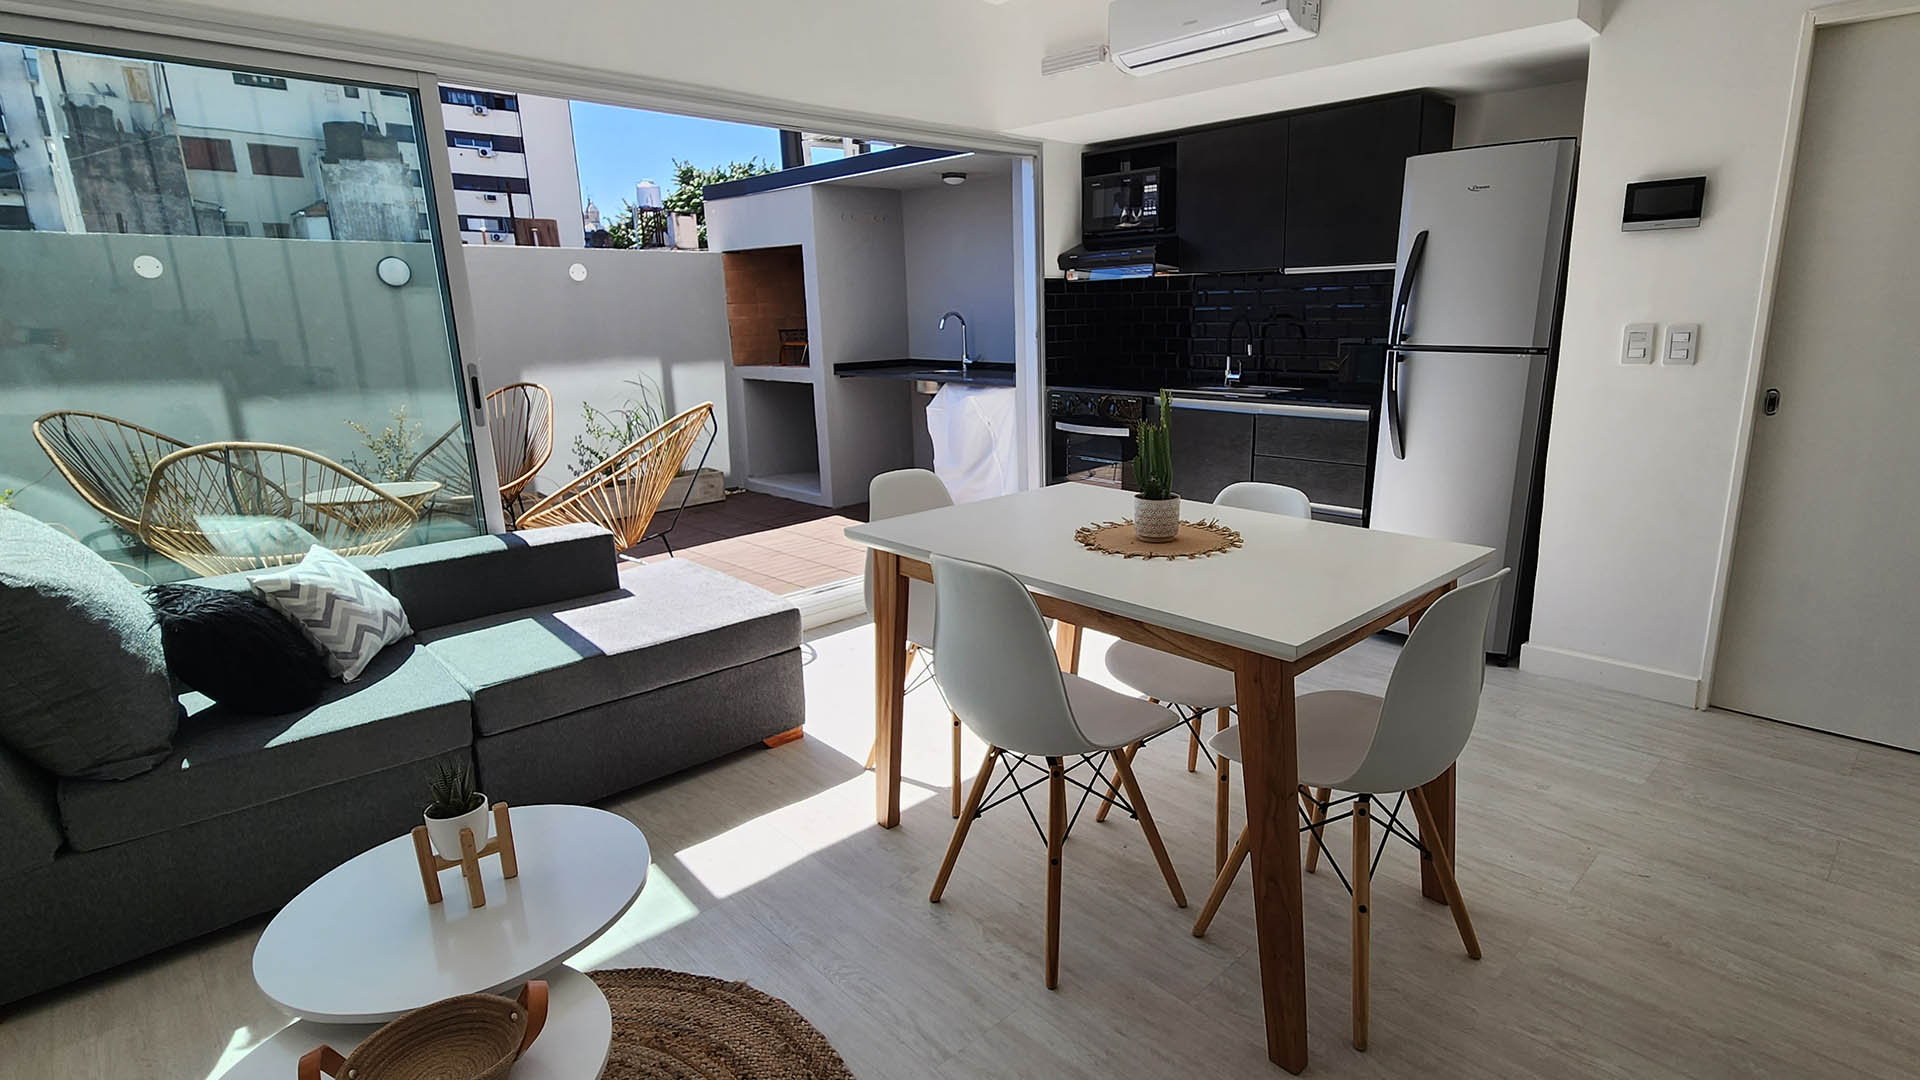 This is a unit in the PH Eco project that already works in the San Telmo neighborhood, the connection with the outside was also prioritized in the proposal